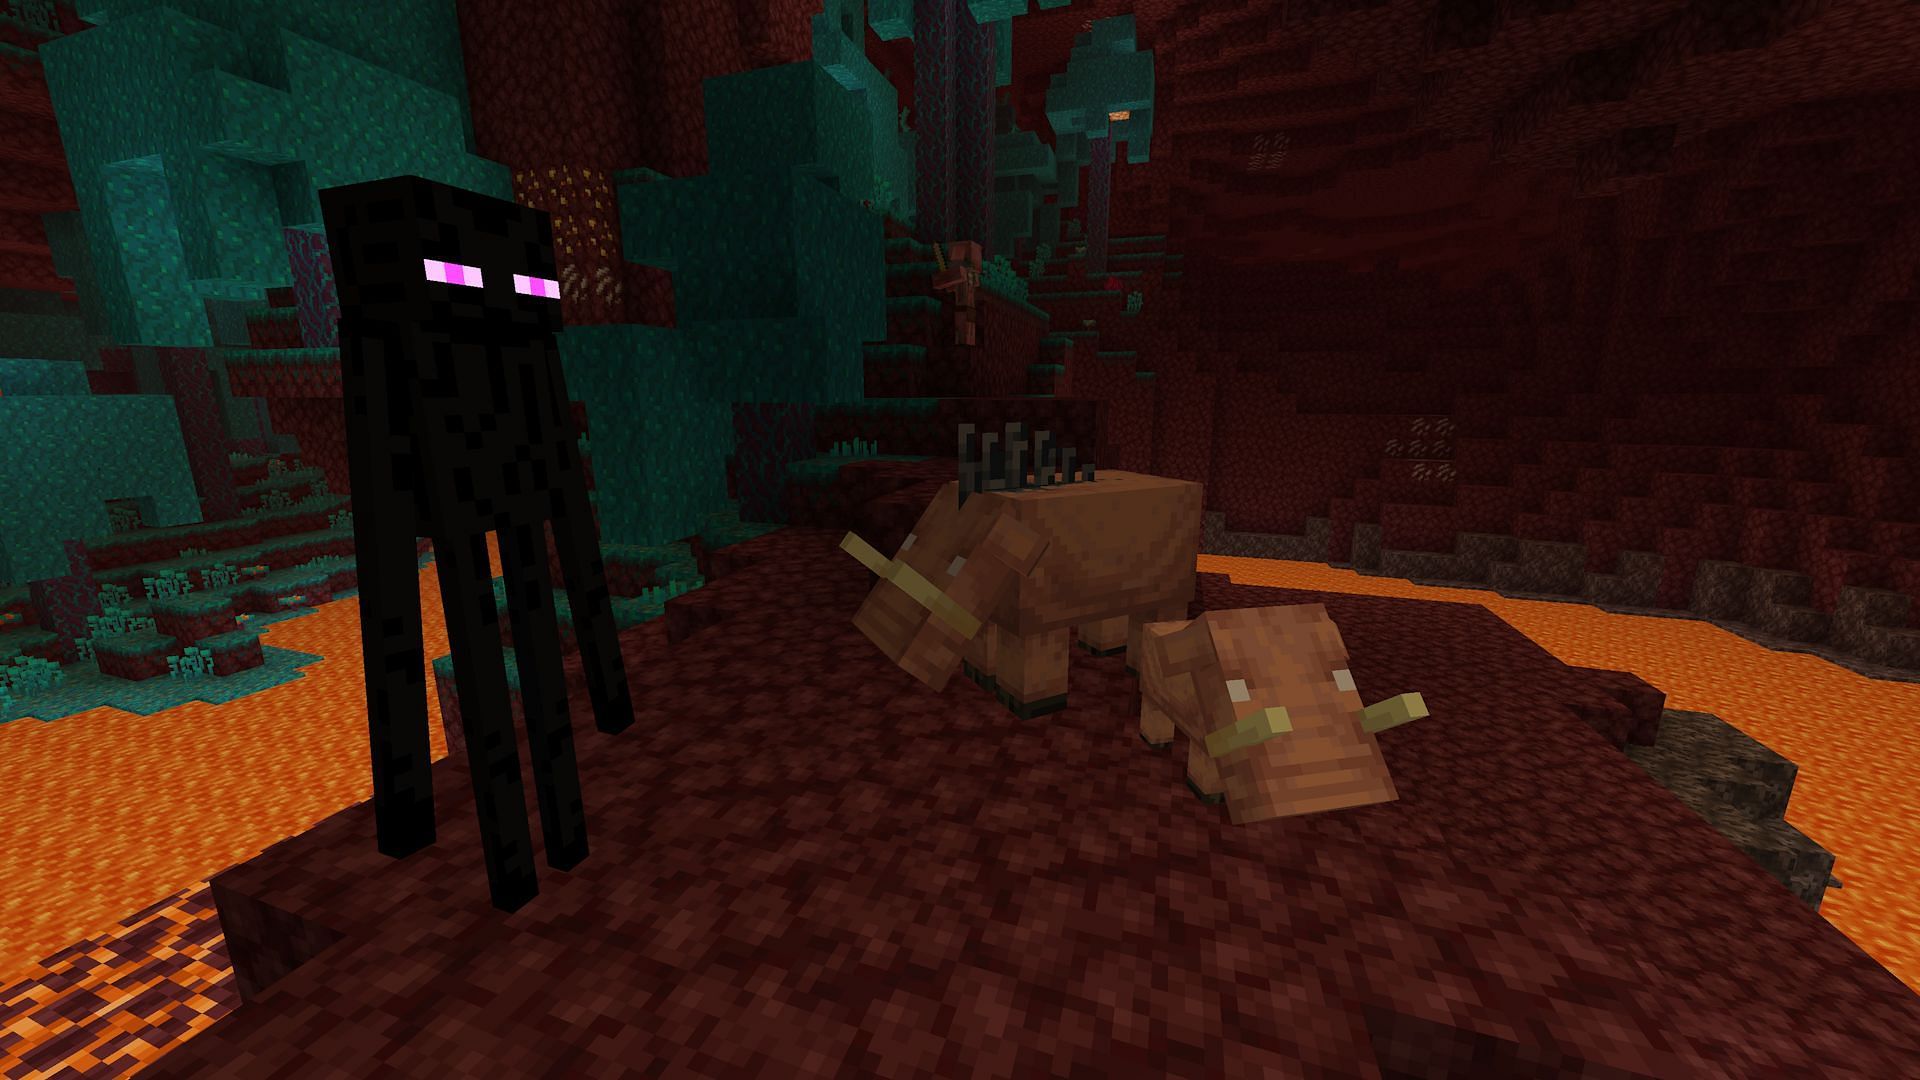 Wolves now have the health of hoglins and enderman (Image via Mojang)